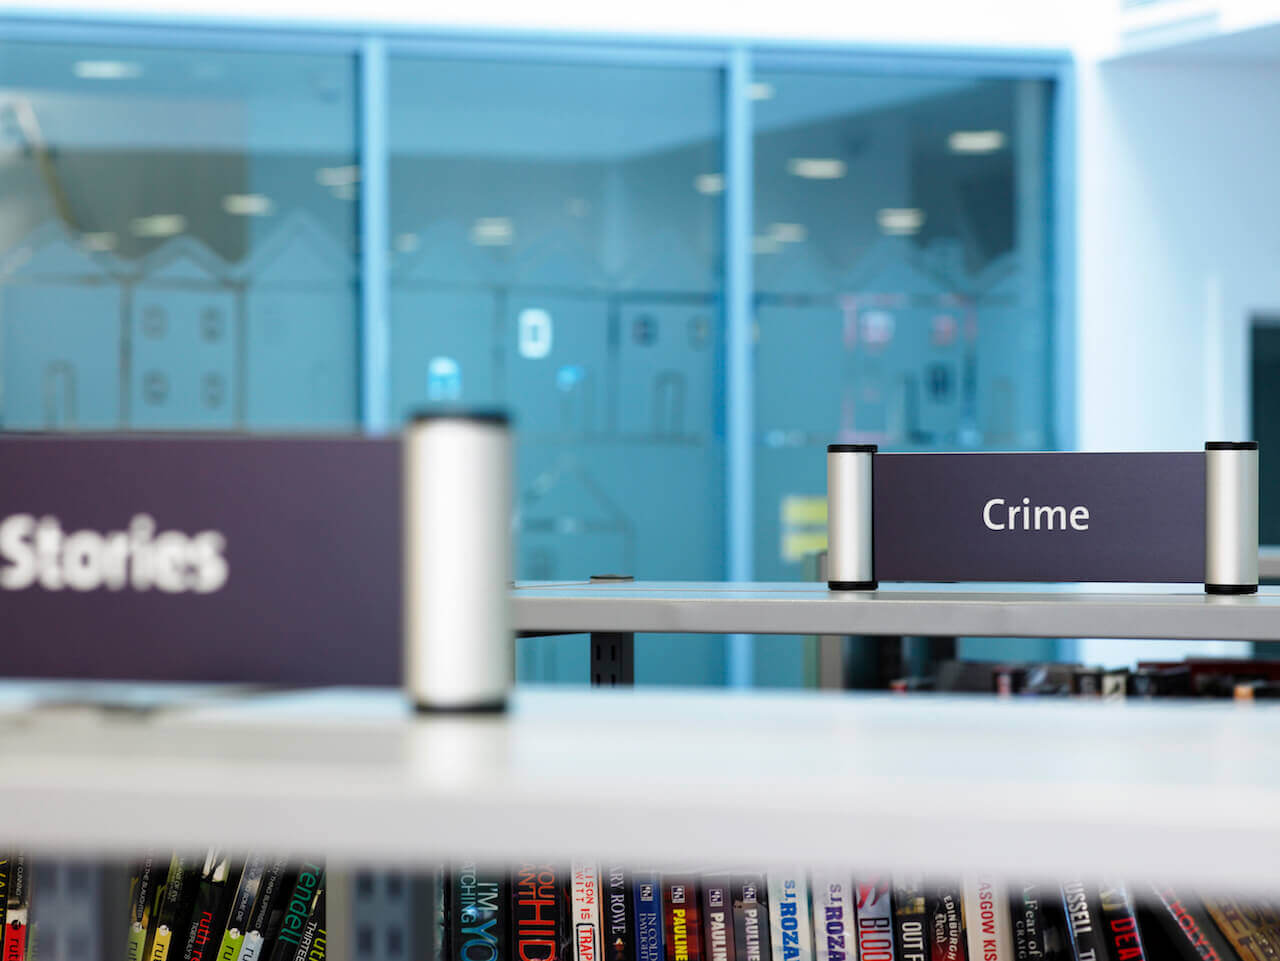 Shelf signage for Northumberland Libraries